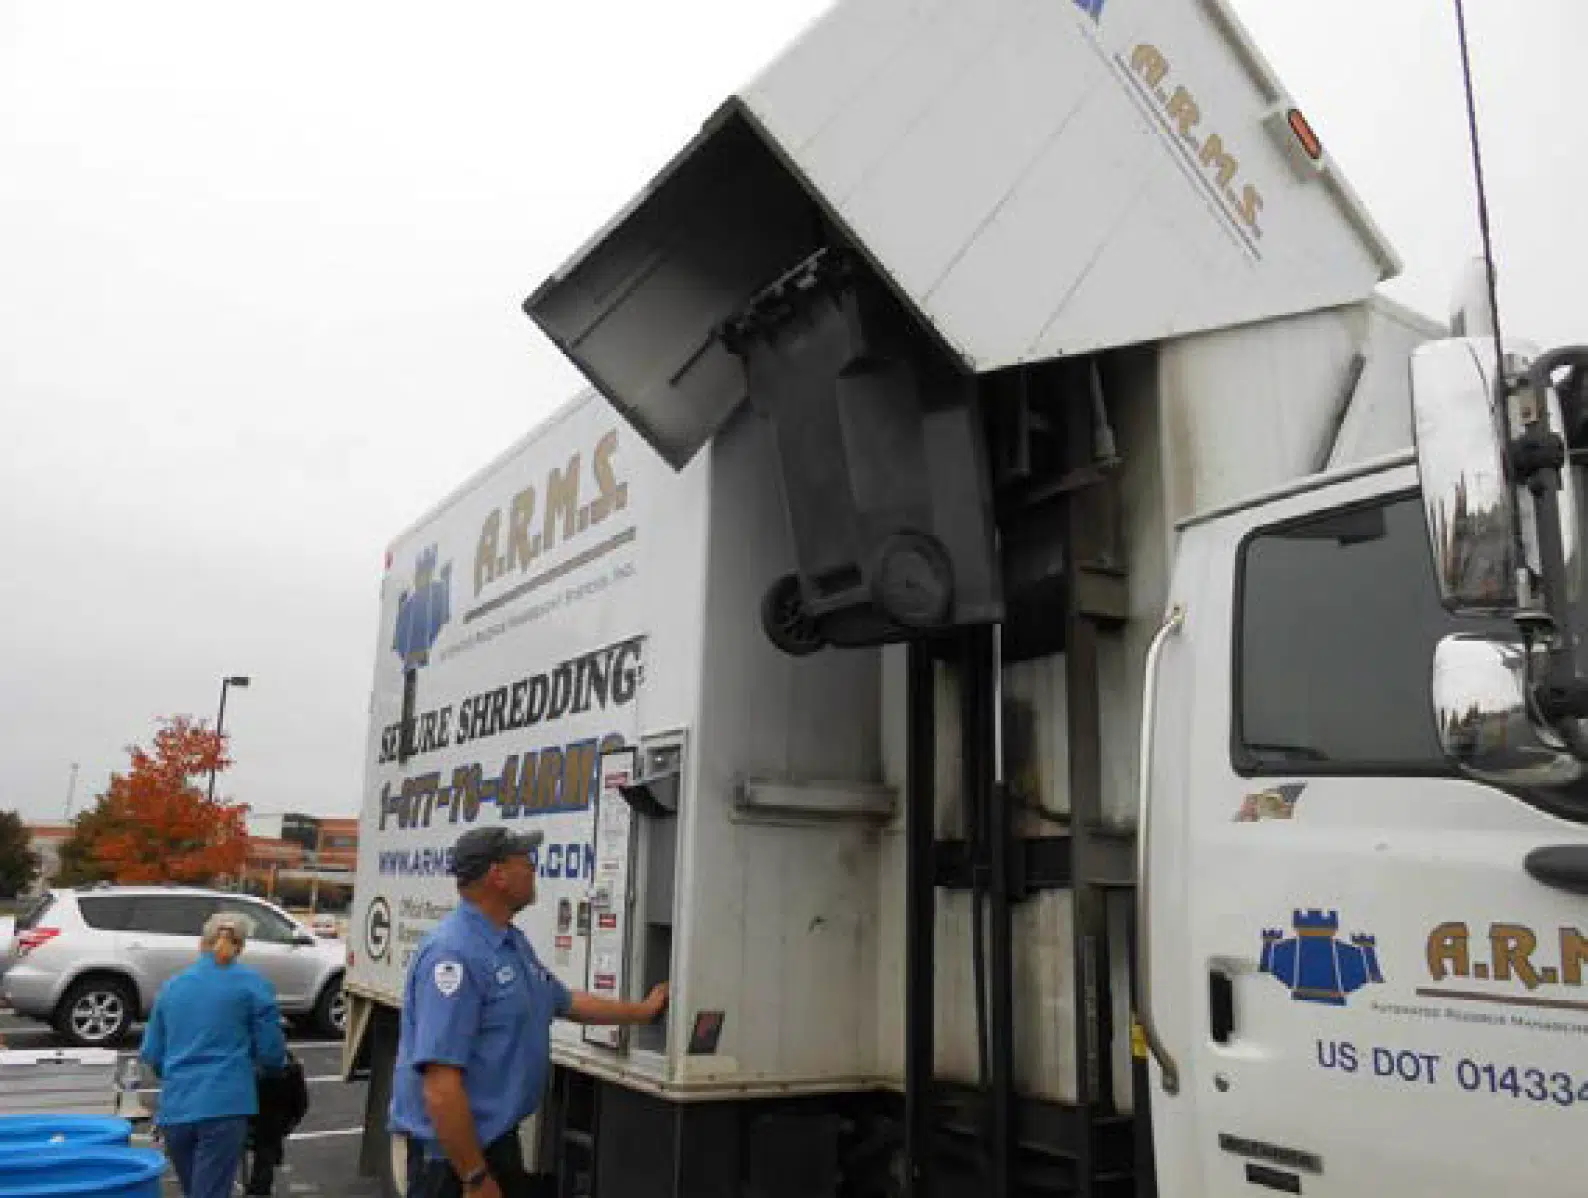 Bank First To Host Free Shredding Event This Saturday